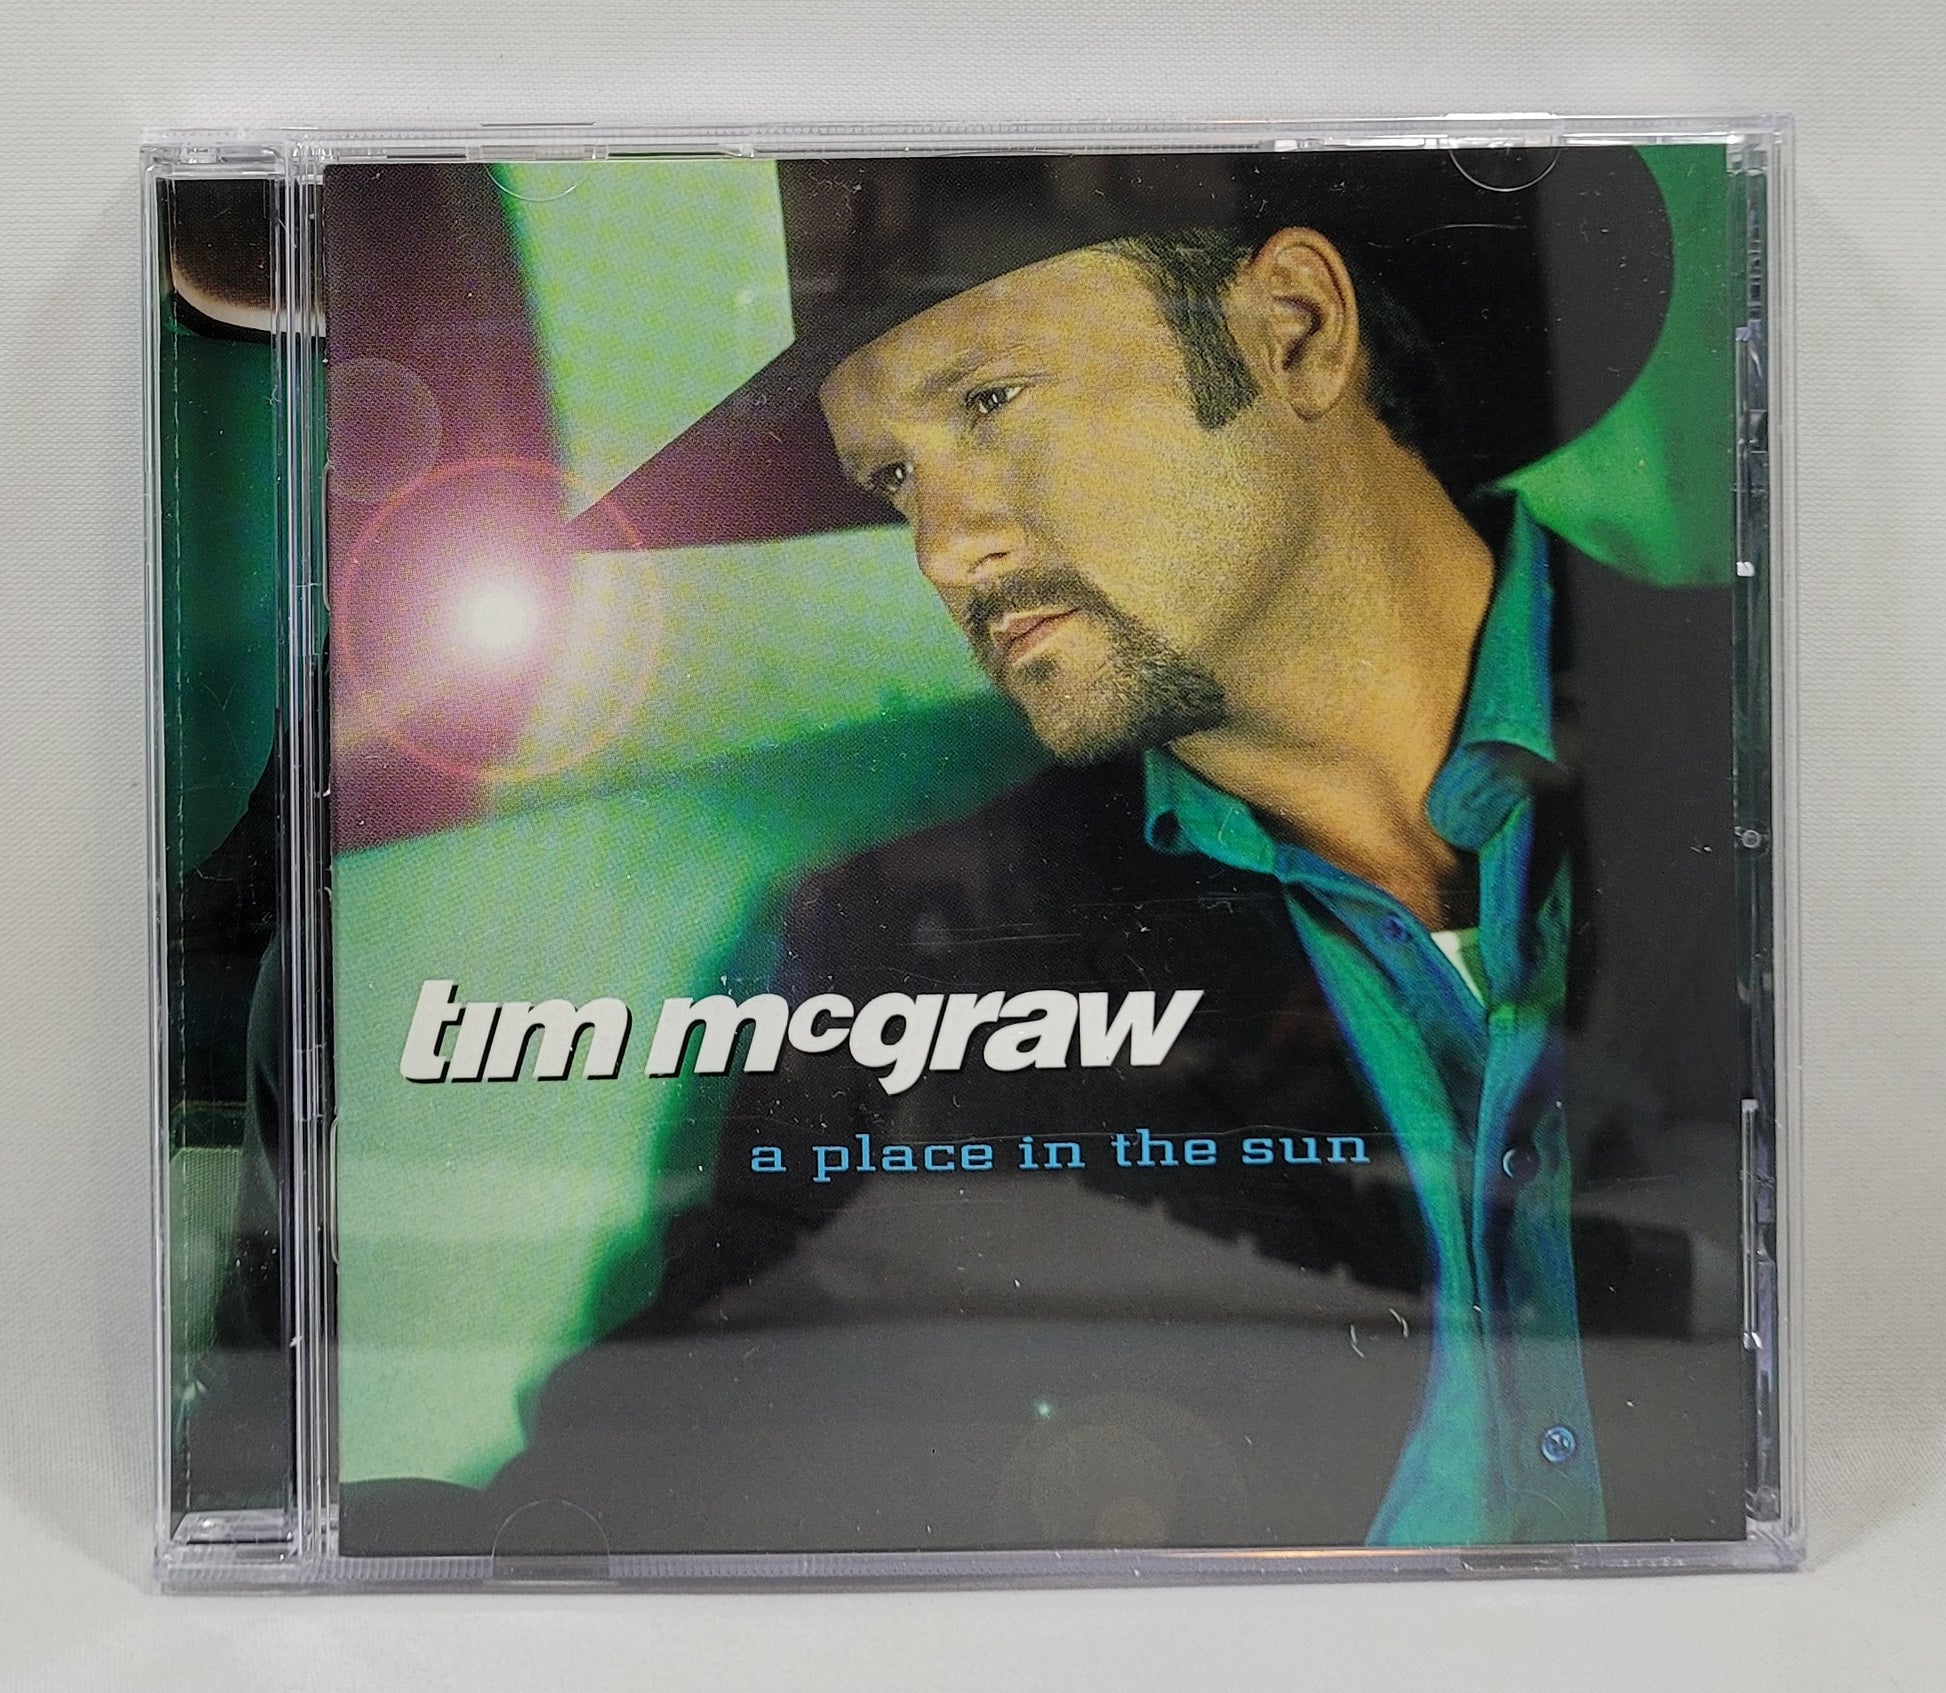 Tim McGraw - A Place in the Sun [1999 Commerce Pressing] [Used CD]